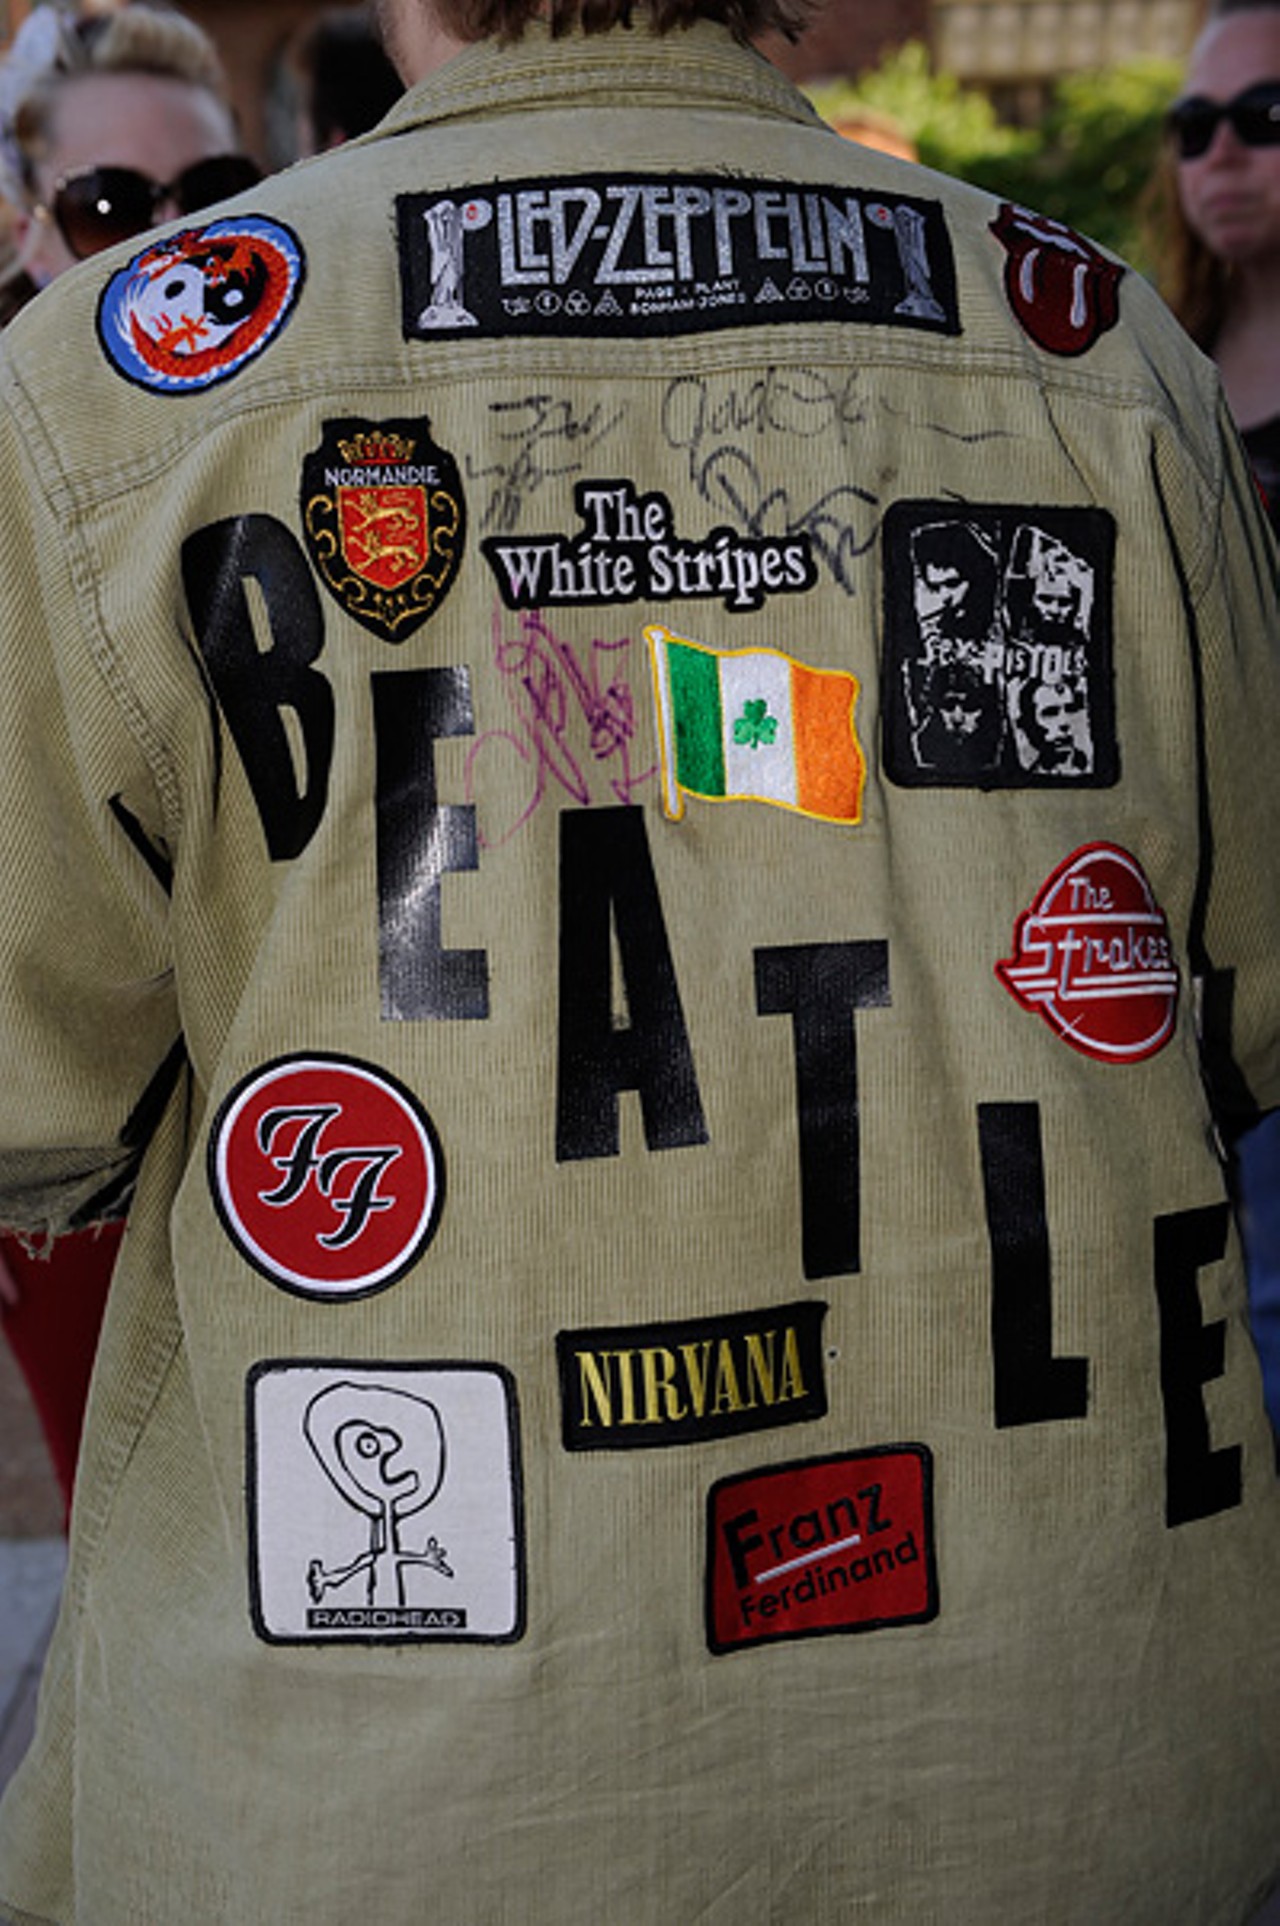 As with any proper rock show, fans came decked out in attire representing their favorite bands, including this jacket with a fan's favorite bands. Read the show review by Christian Schaeffer.